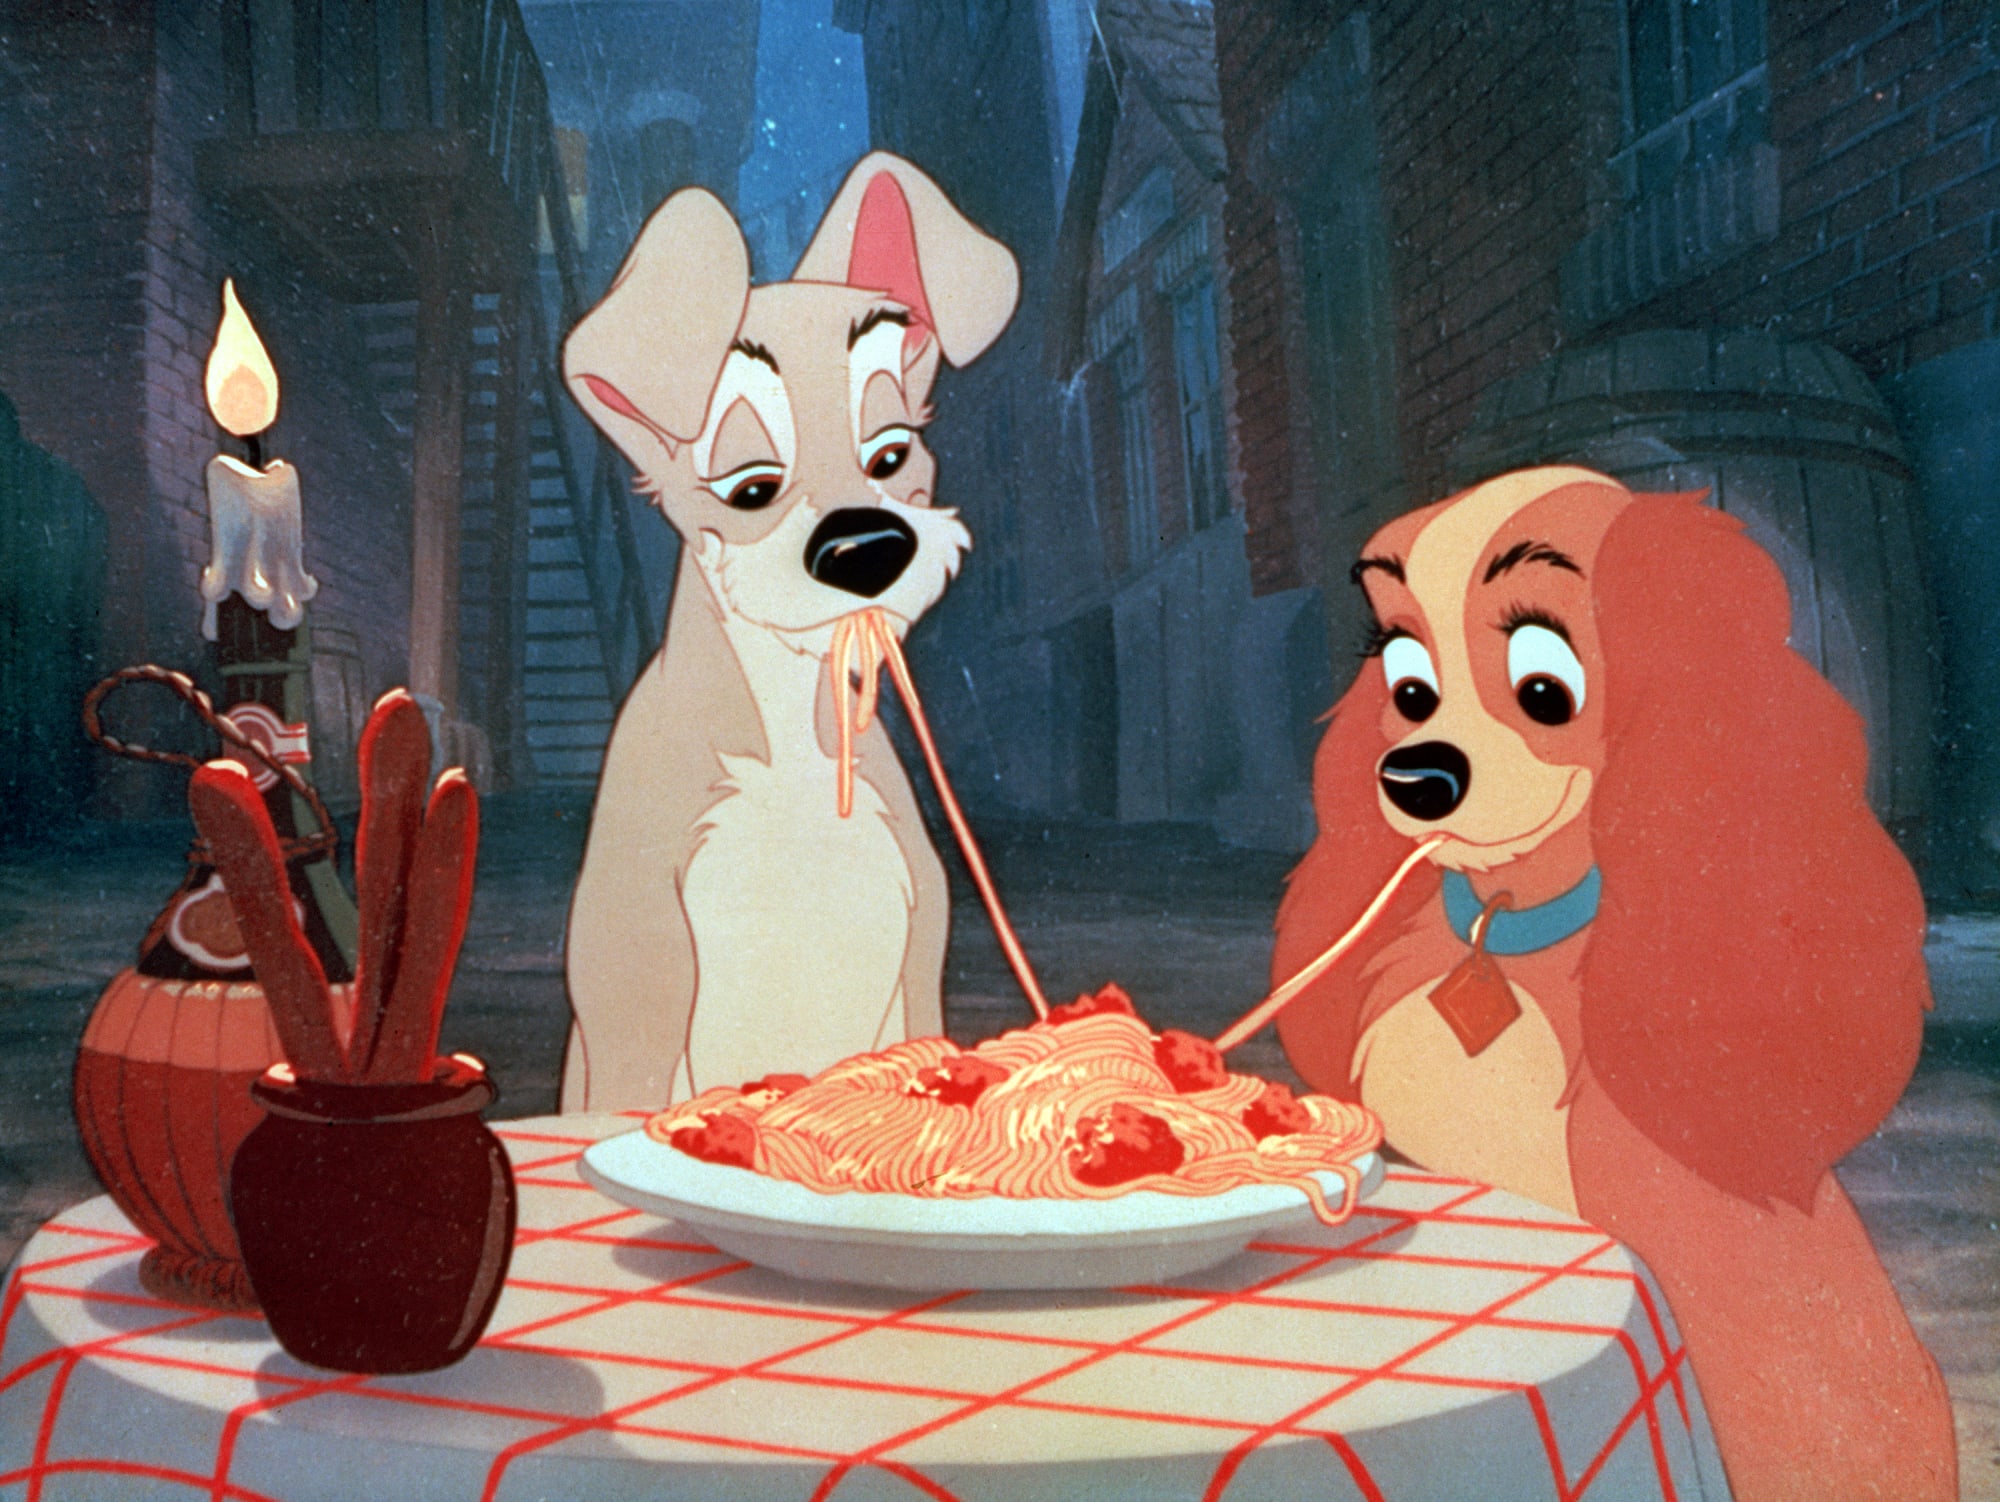 udgør accent dommer 2019 Lady and the Tramp drops first trailer during D23